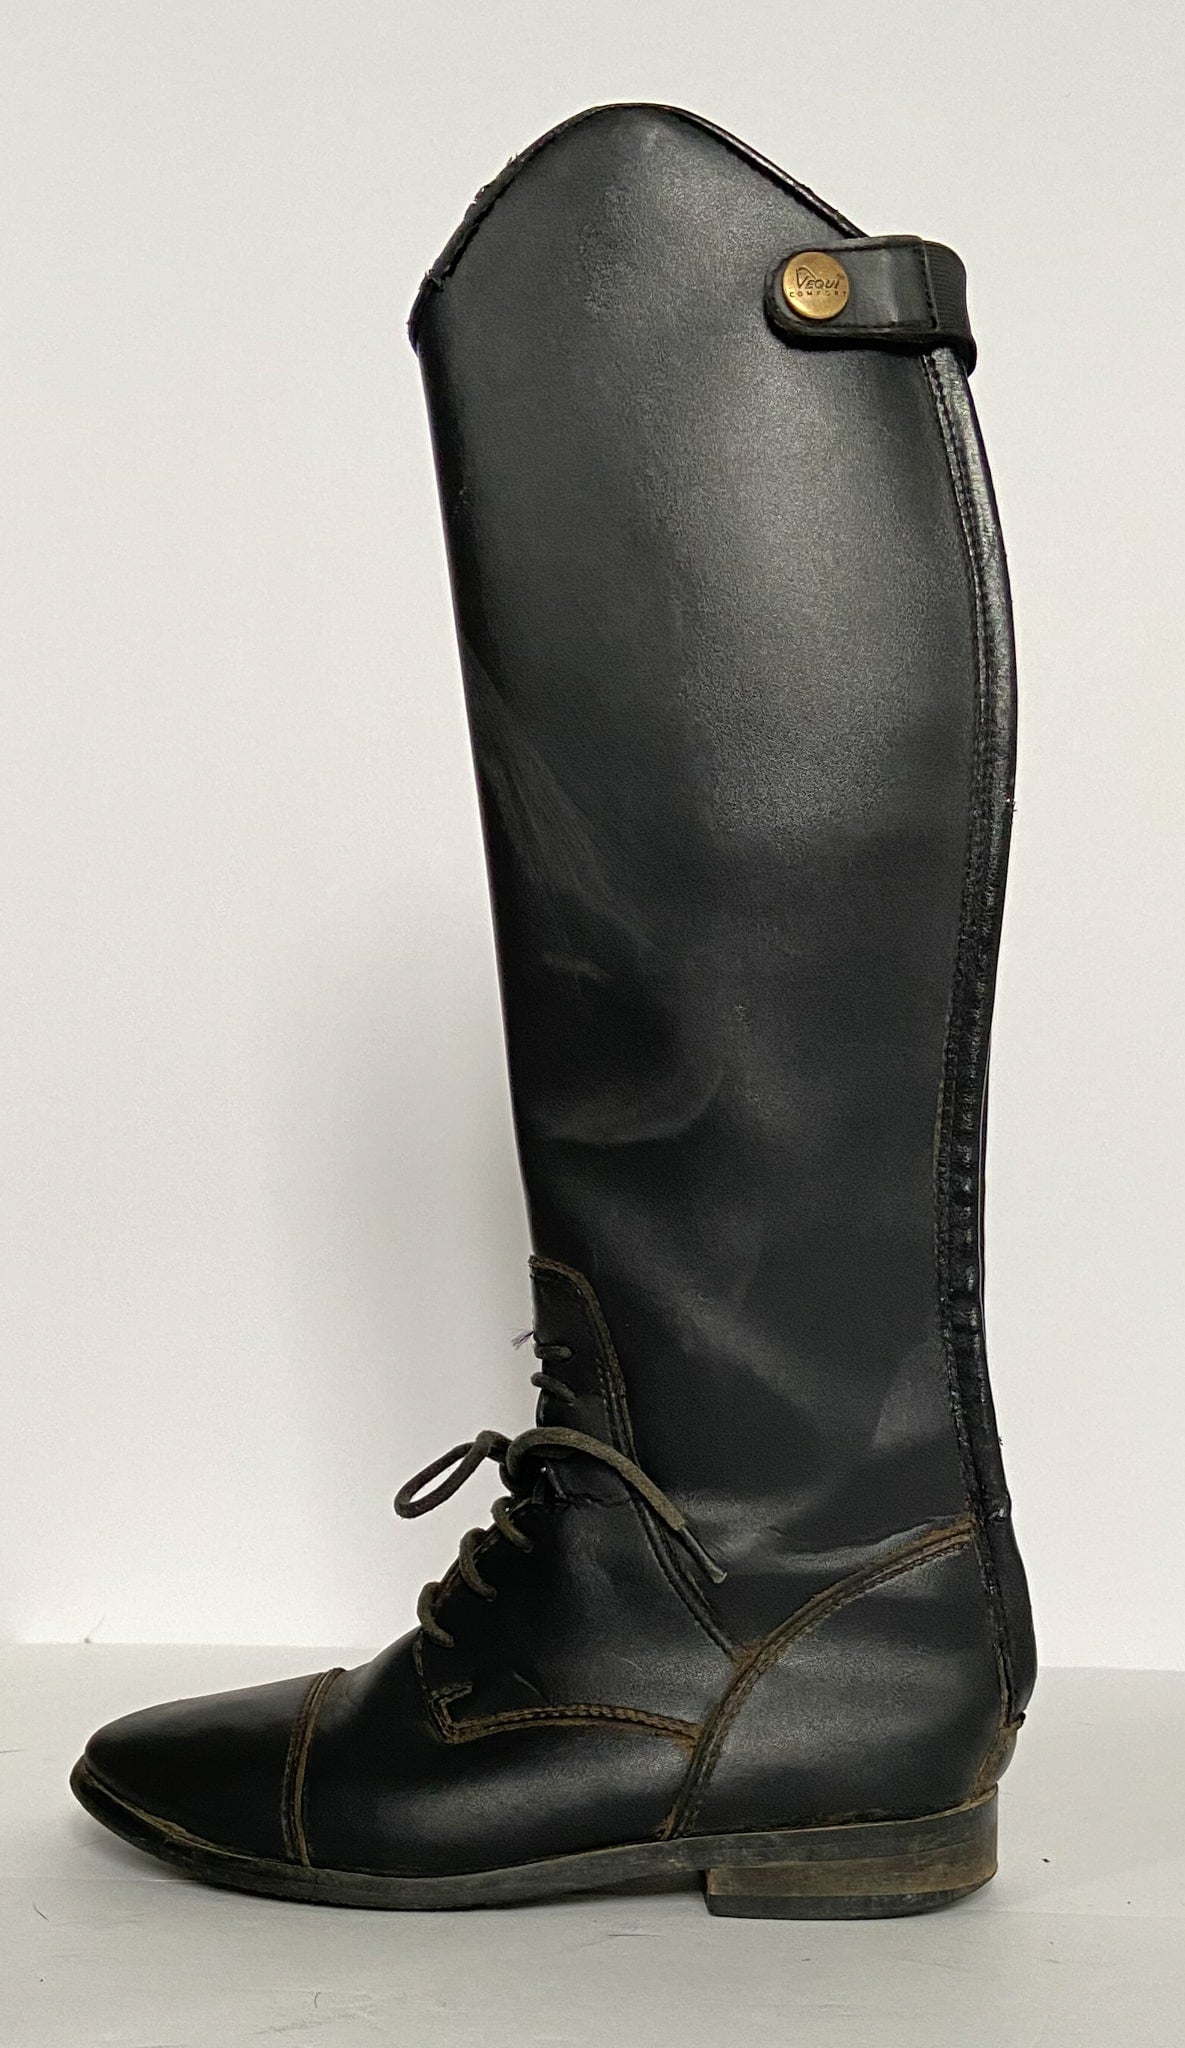 EquiComfort Tall Boot - Black - Youth 3